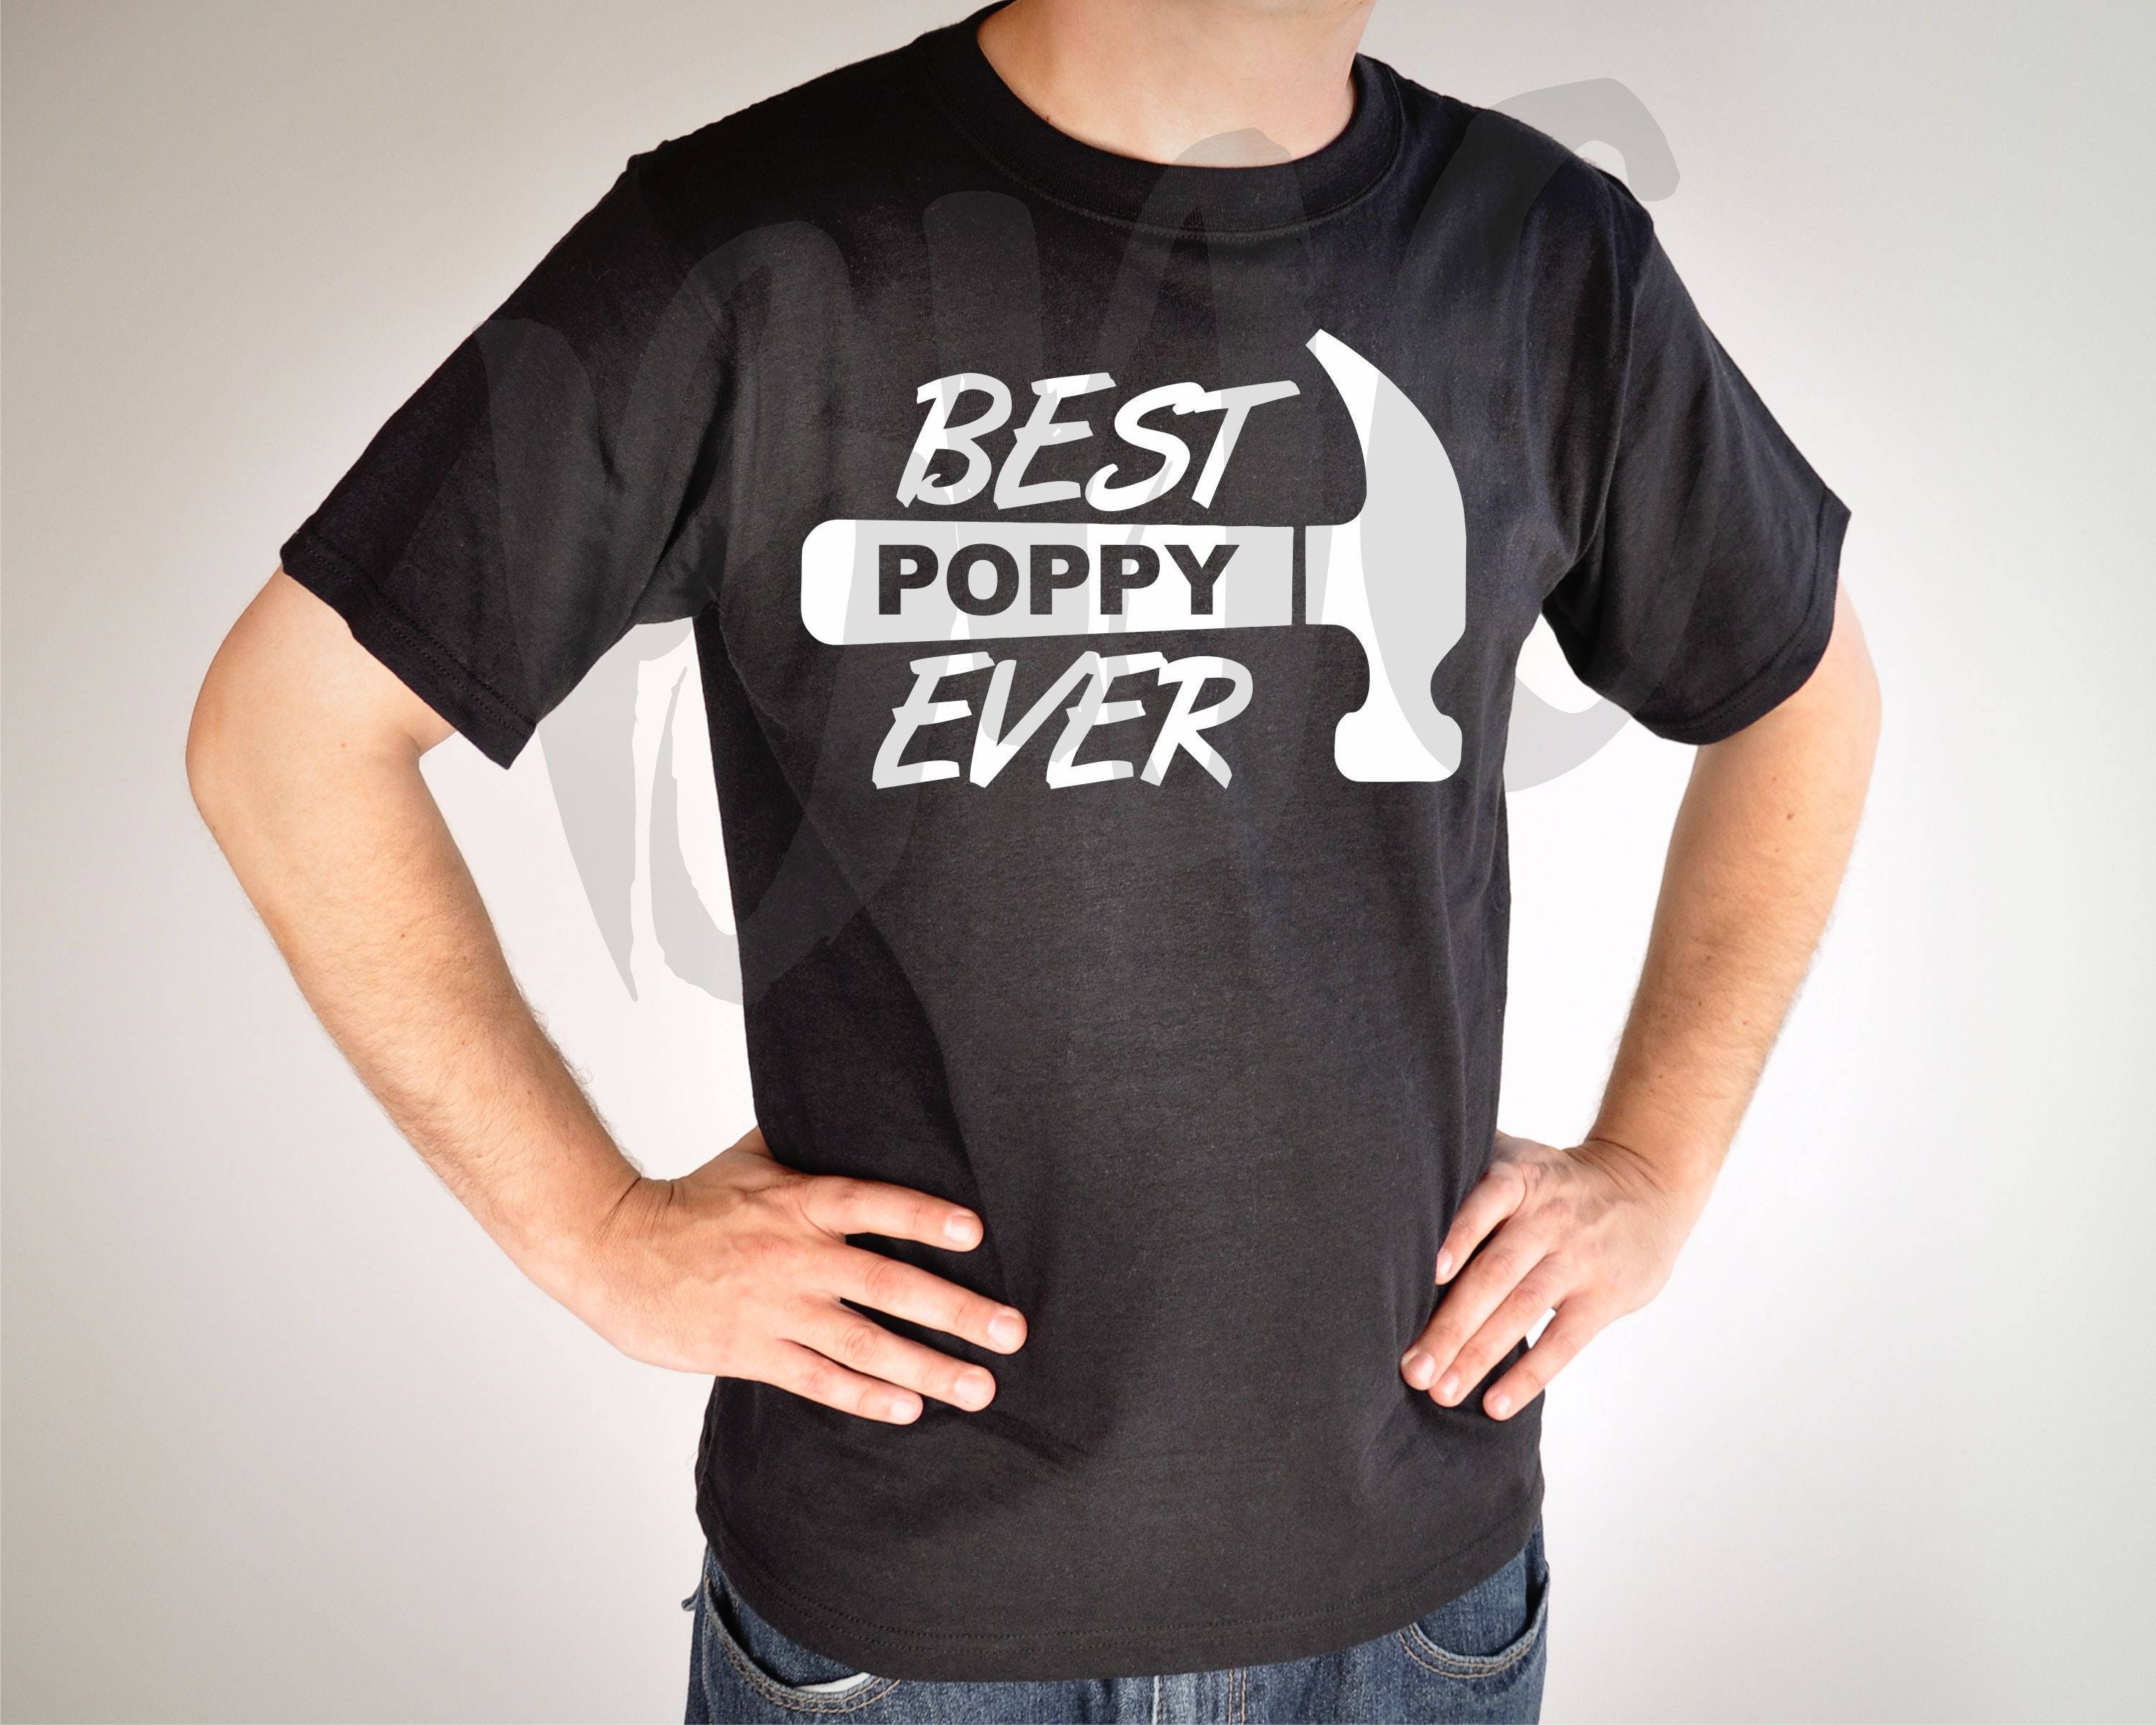 Download Best Poppy Ever SVG PNG DXF Vinyl Design Circut Cameo